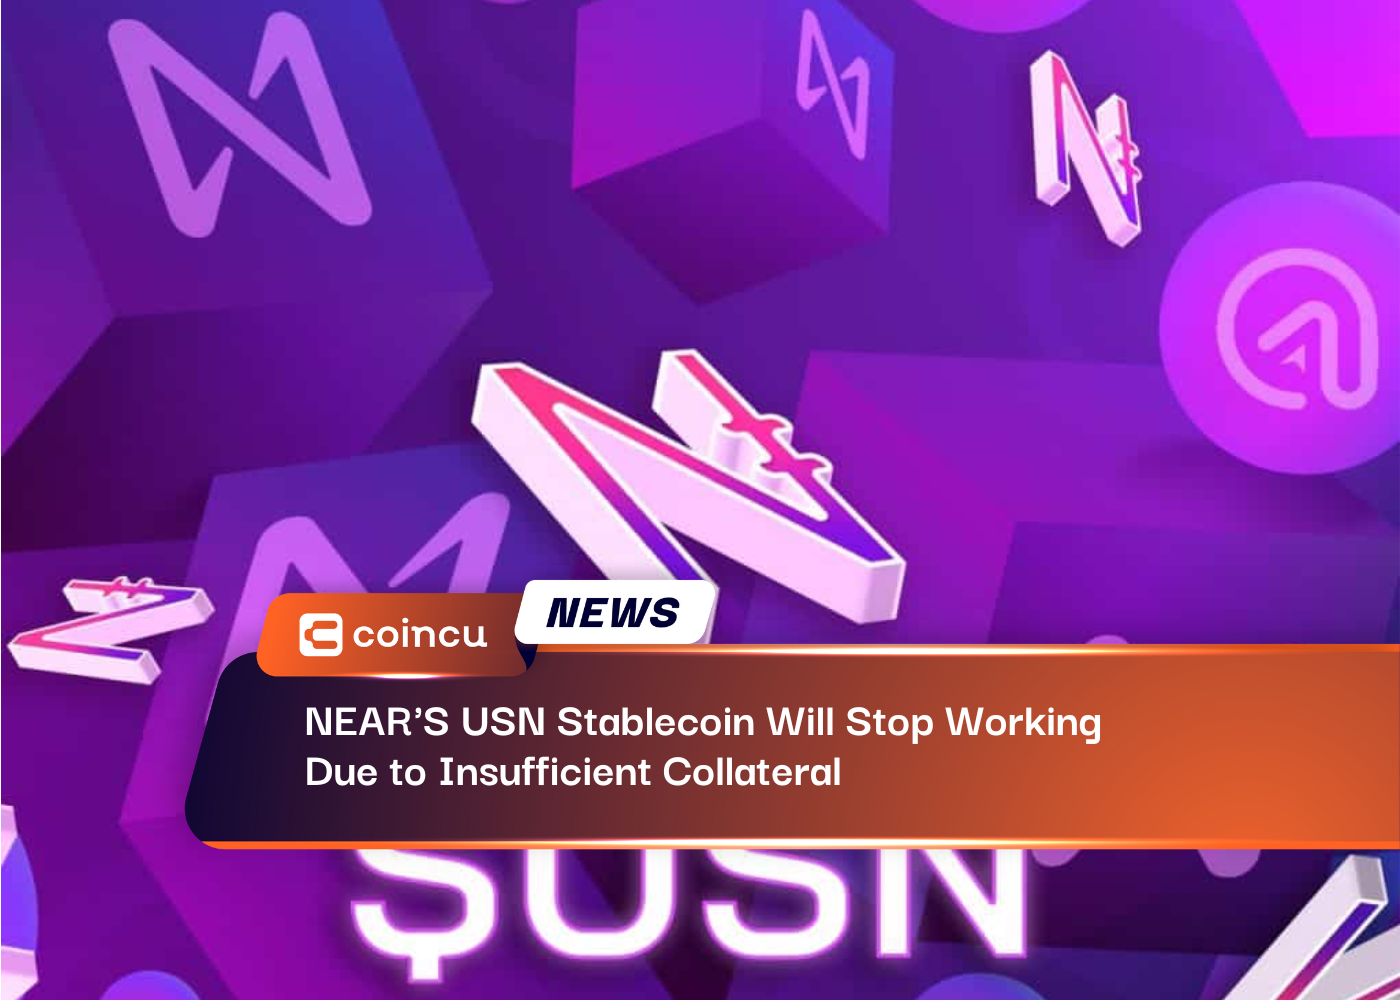 NEAR'S USN Stablecoin Will Stop Working Due to Insufficient Collateral